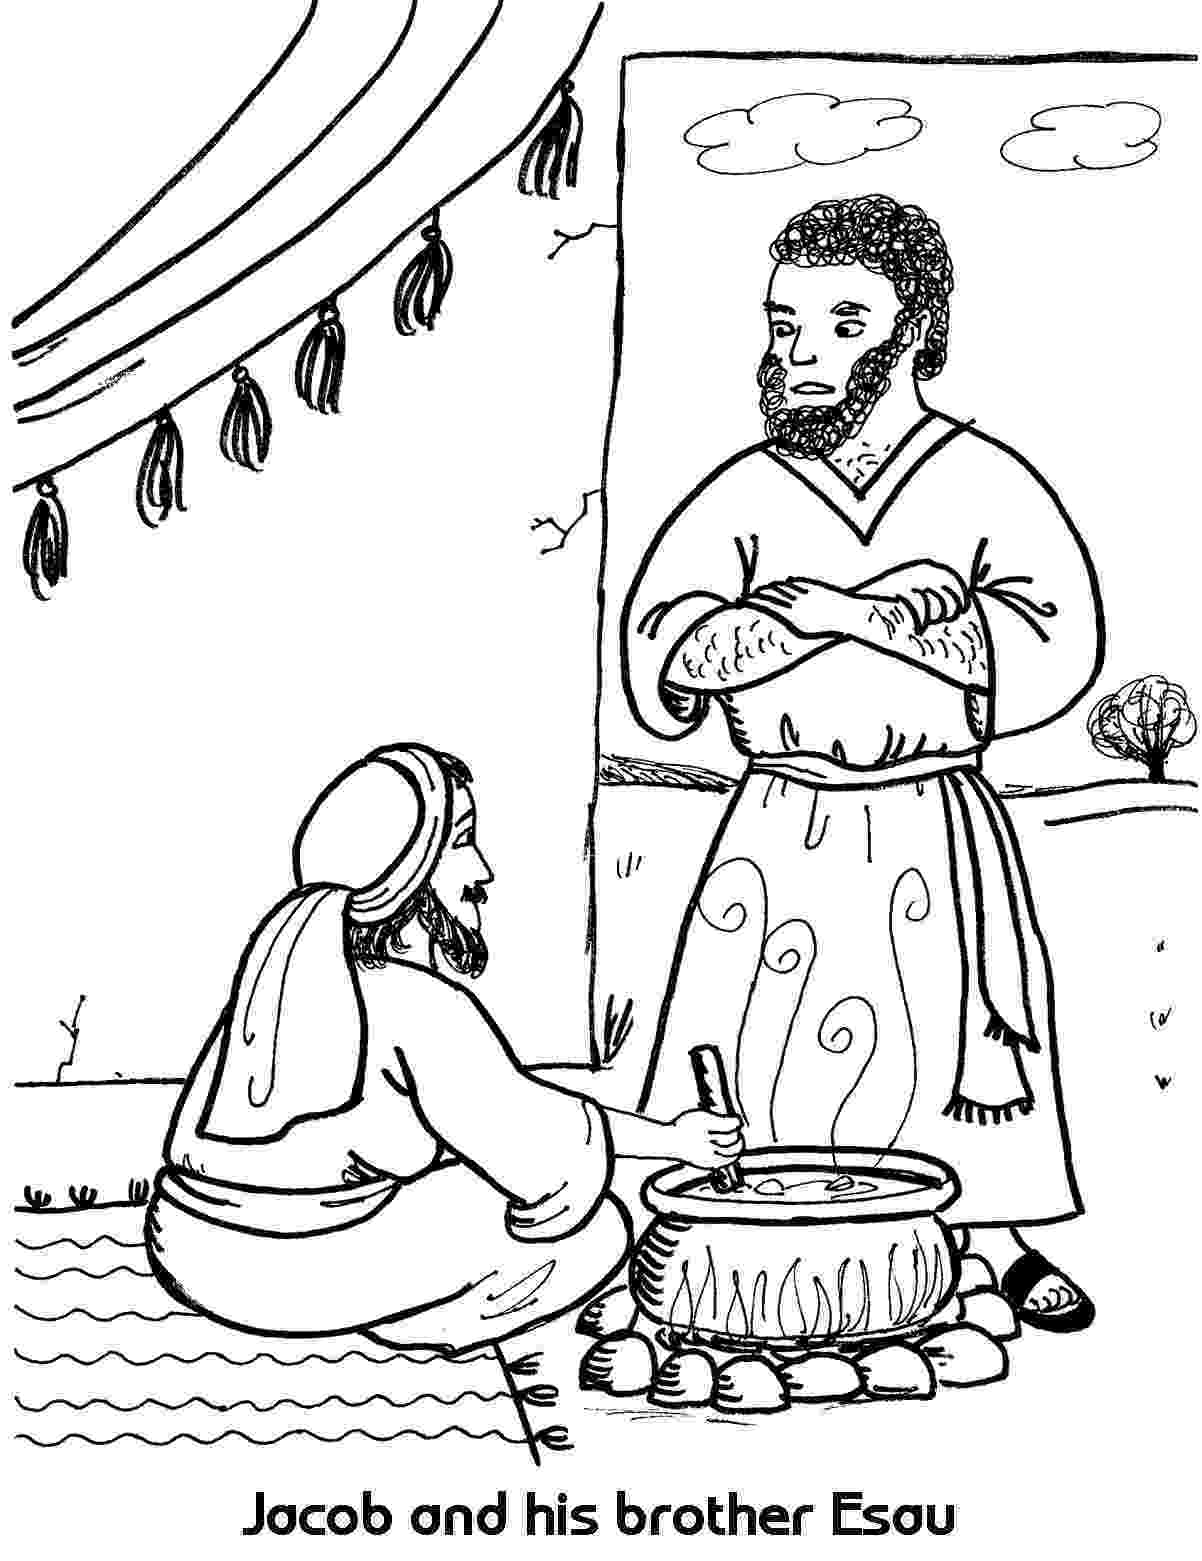 jacob and esau coloring pages pin on jacob esau pages esau coloring jacob and 